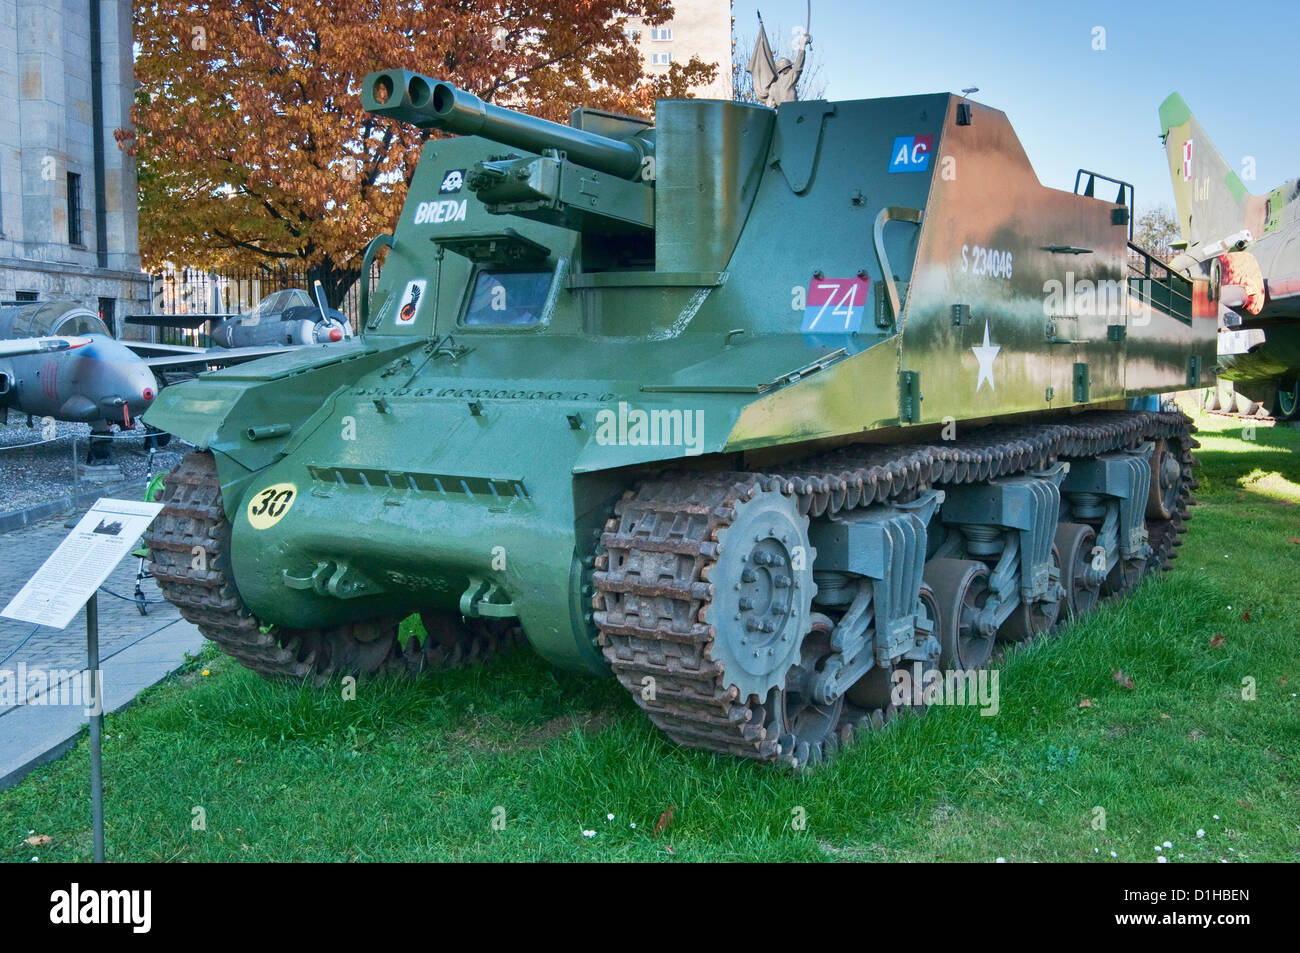 Sexton Mk2 Self Propelled Artillery Vehicle Built In Canada At Polish Army Museum In Warsaw